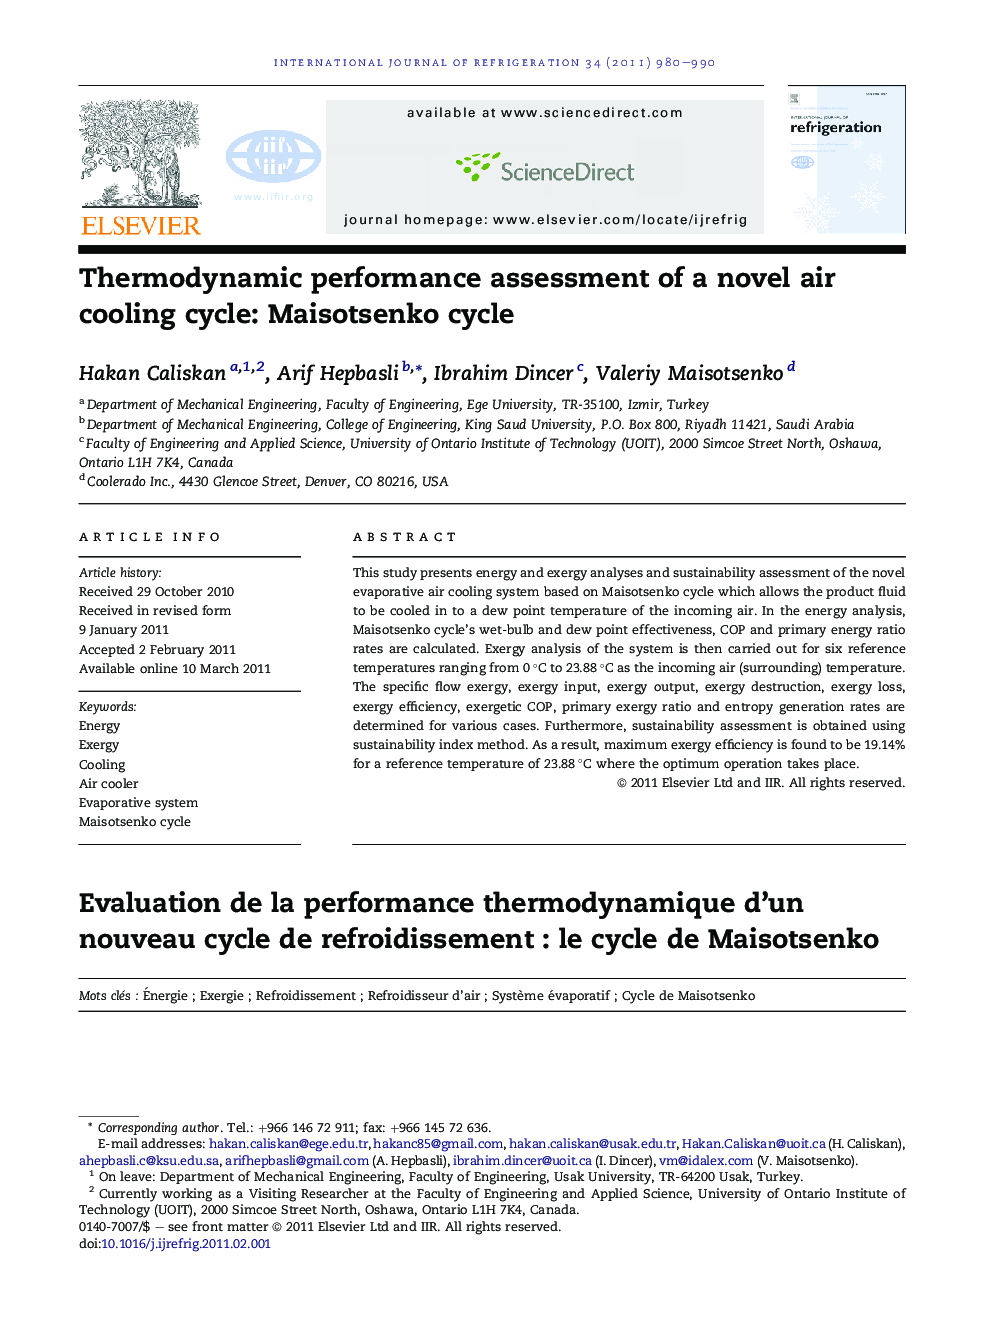 Thermodynamic performance assessment of a novel air cooling cycle: Maisotsenko cycle